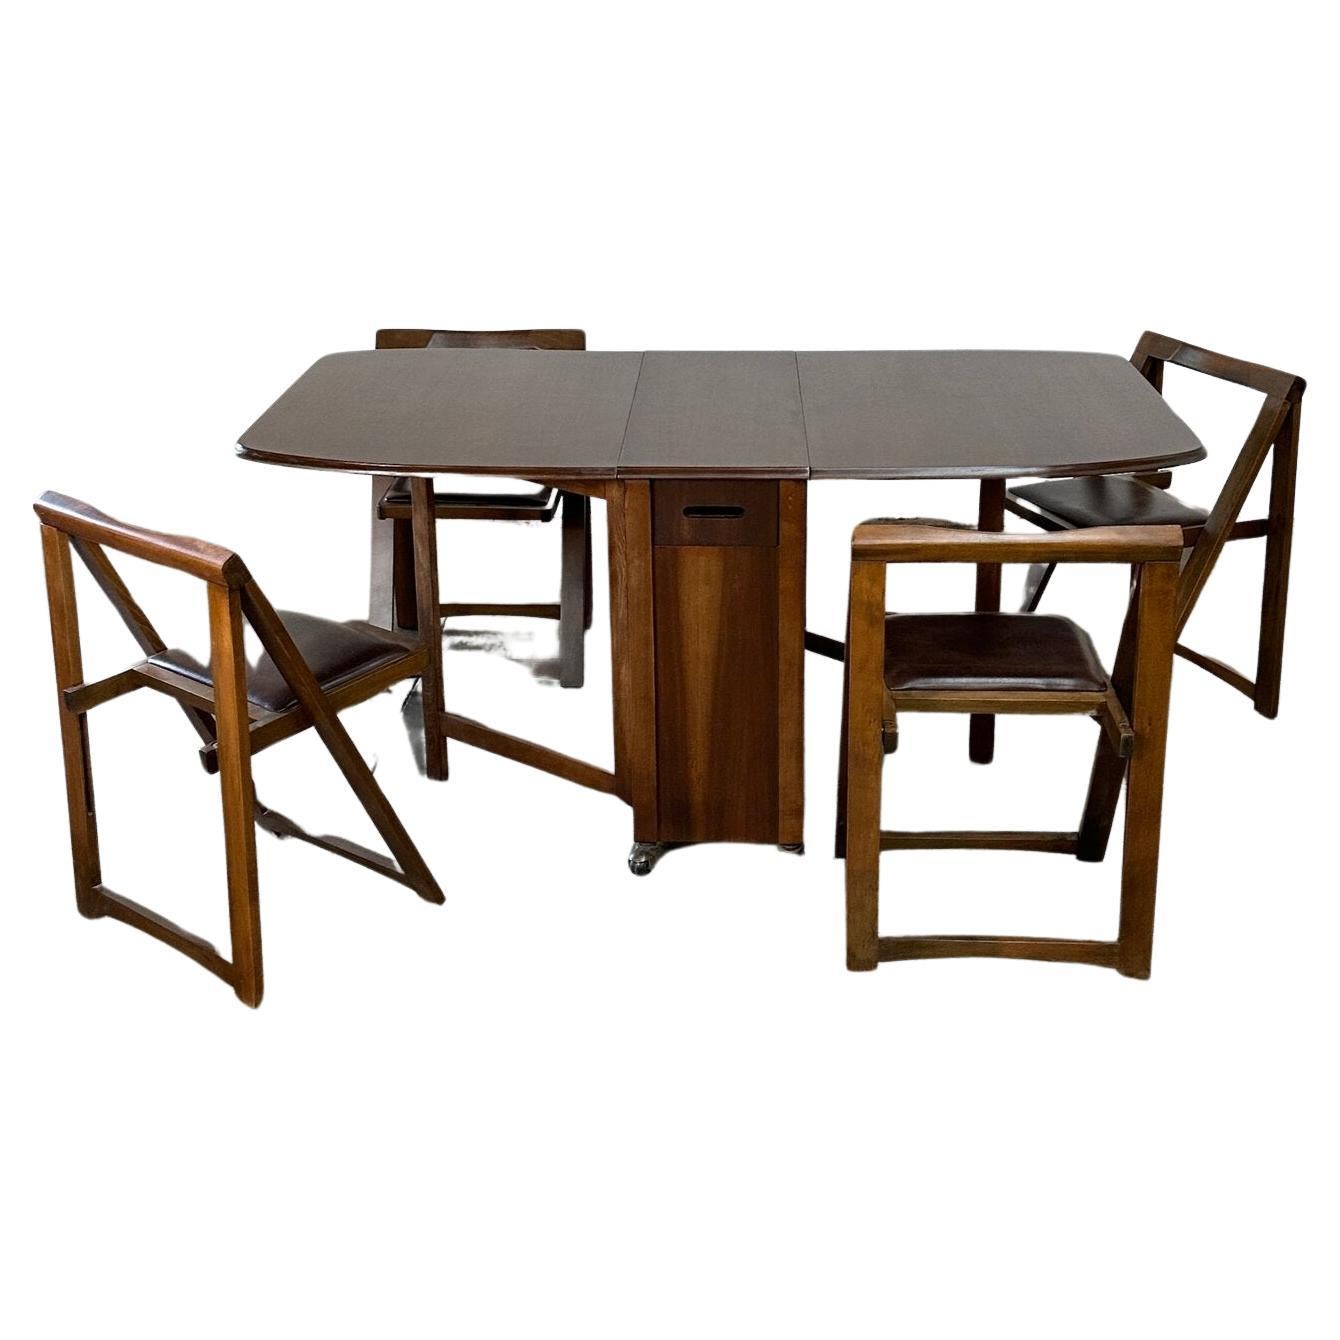 Hide away table and chairs- set